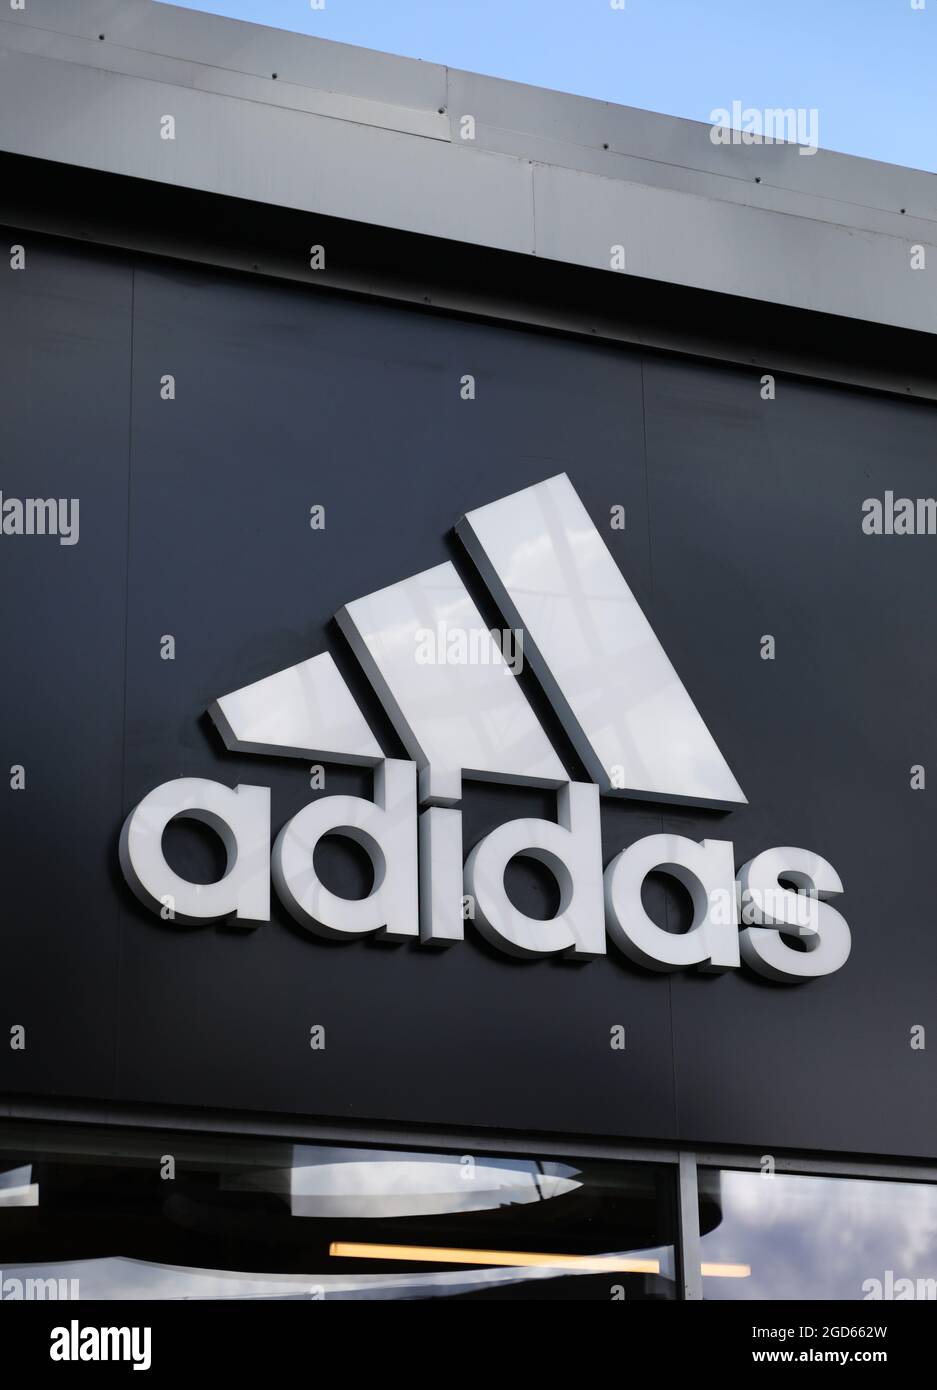 Adidas sign at Hede Fashion Outlet Stock Photo - Alamy